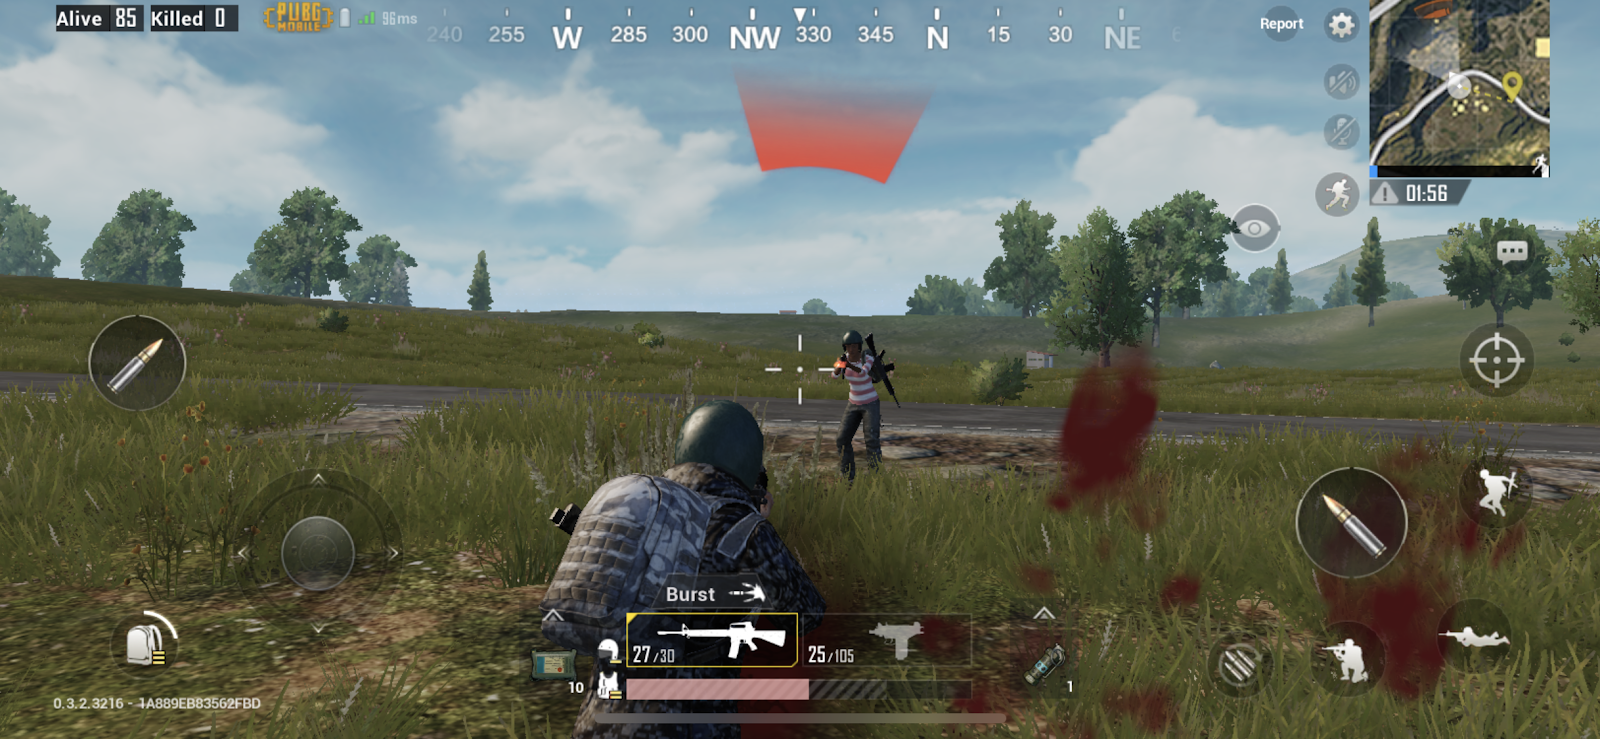 Mouse And Keyboard Users Are Dominating PUBG Mobile ... - 1600 x 739 png 1491kB